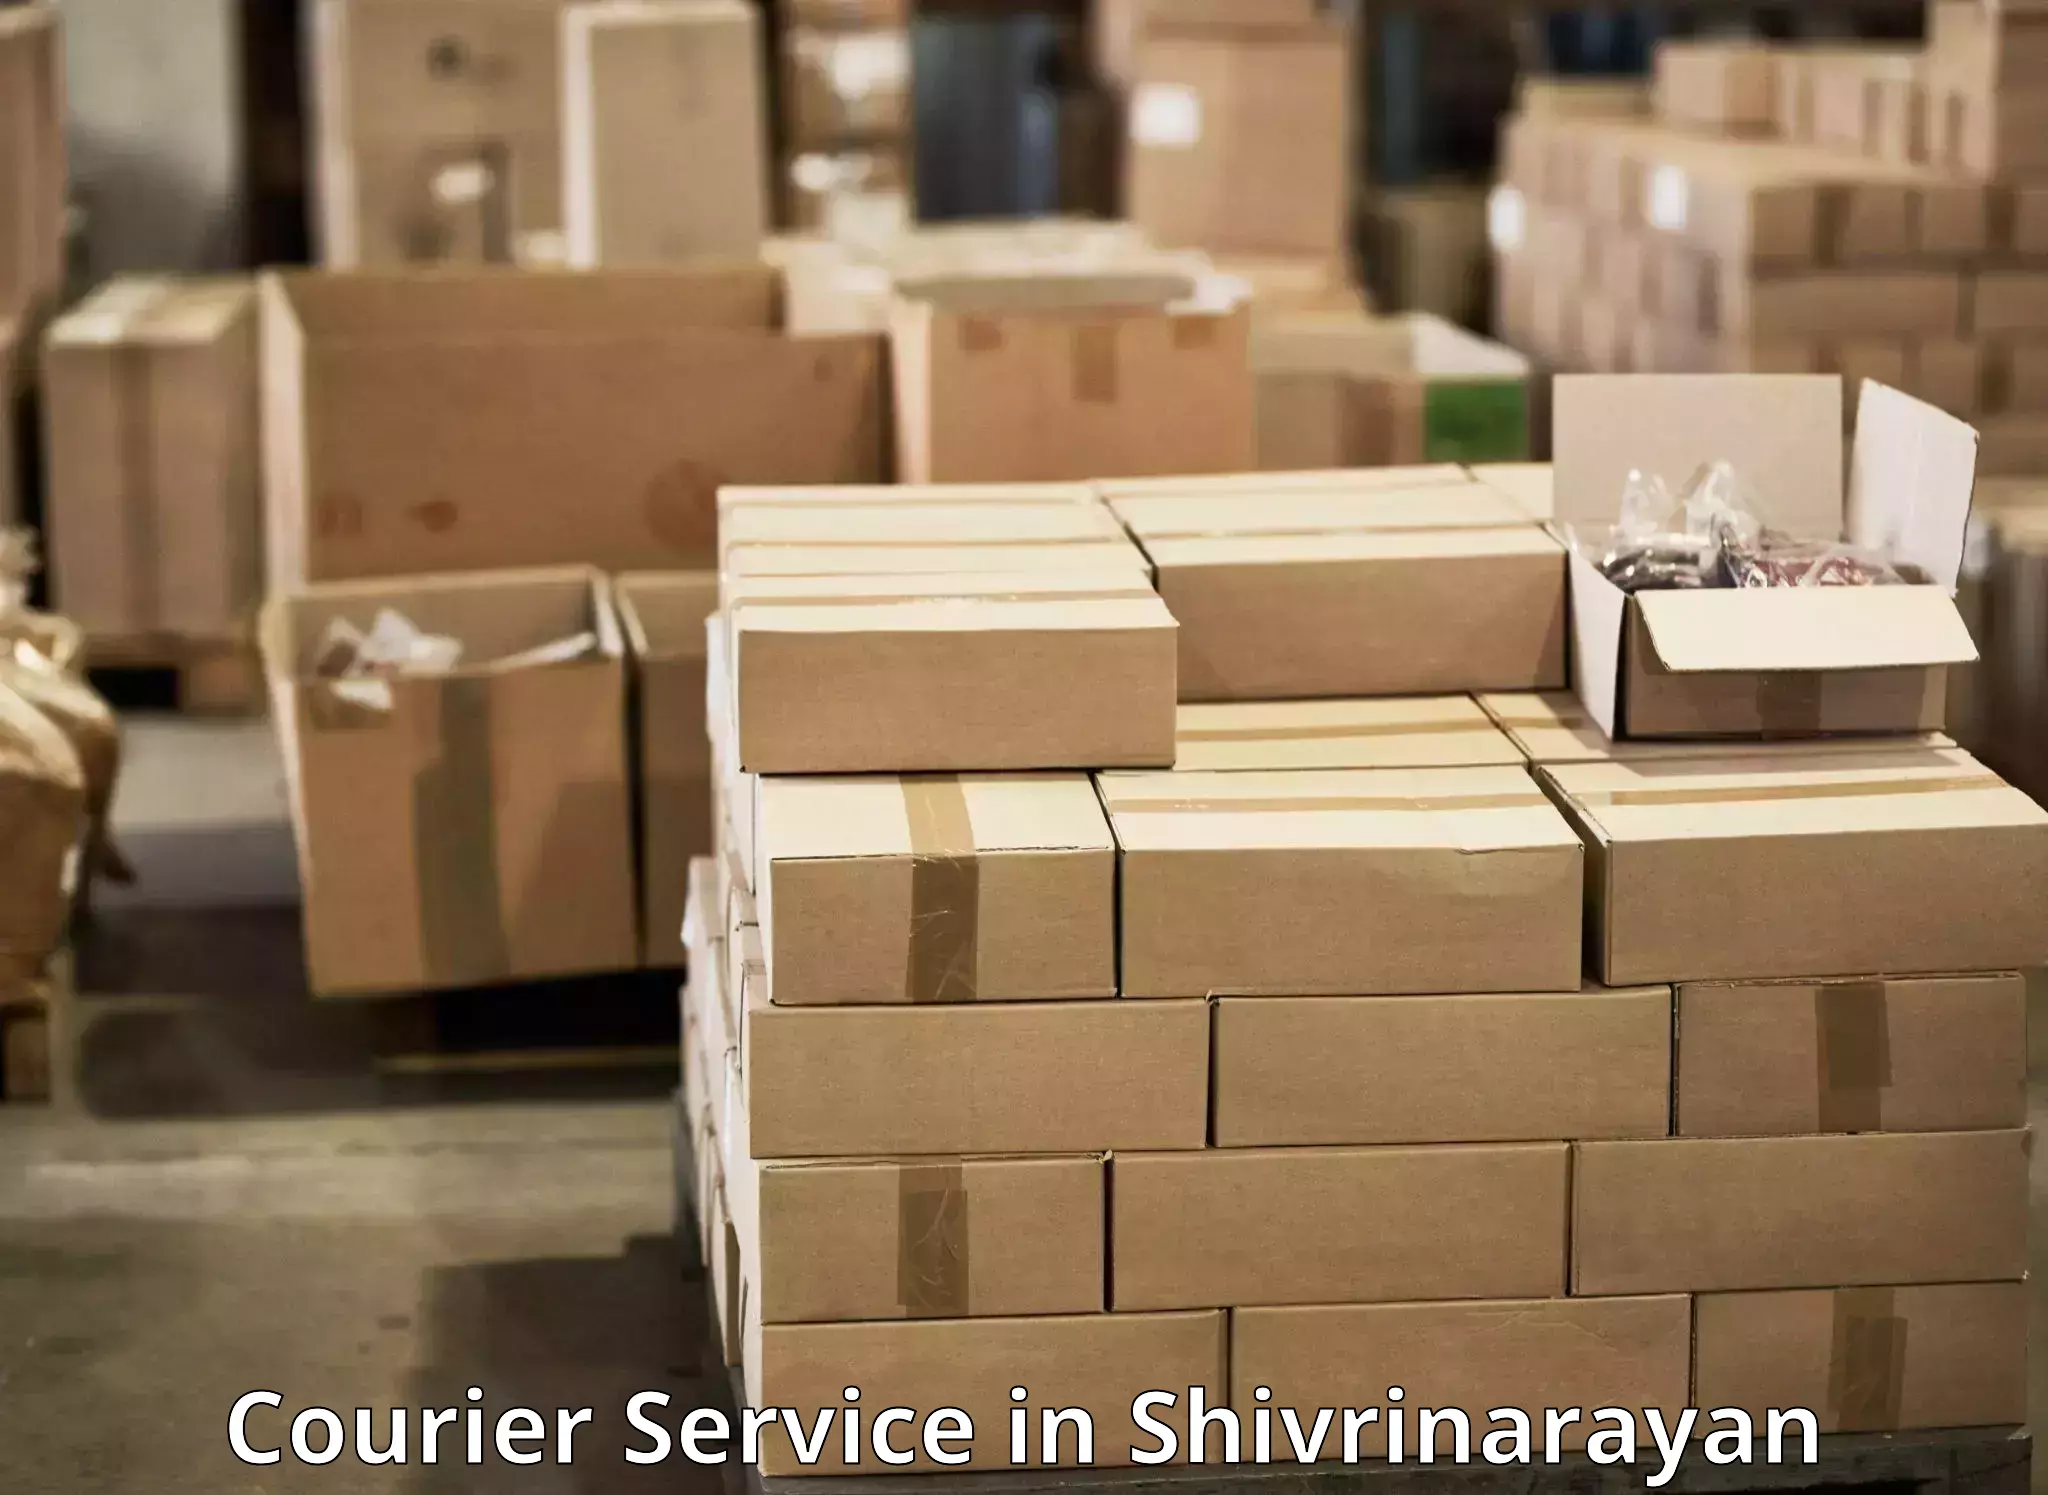 Professional courier services in Shivrinarayan